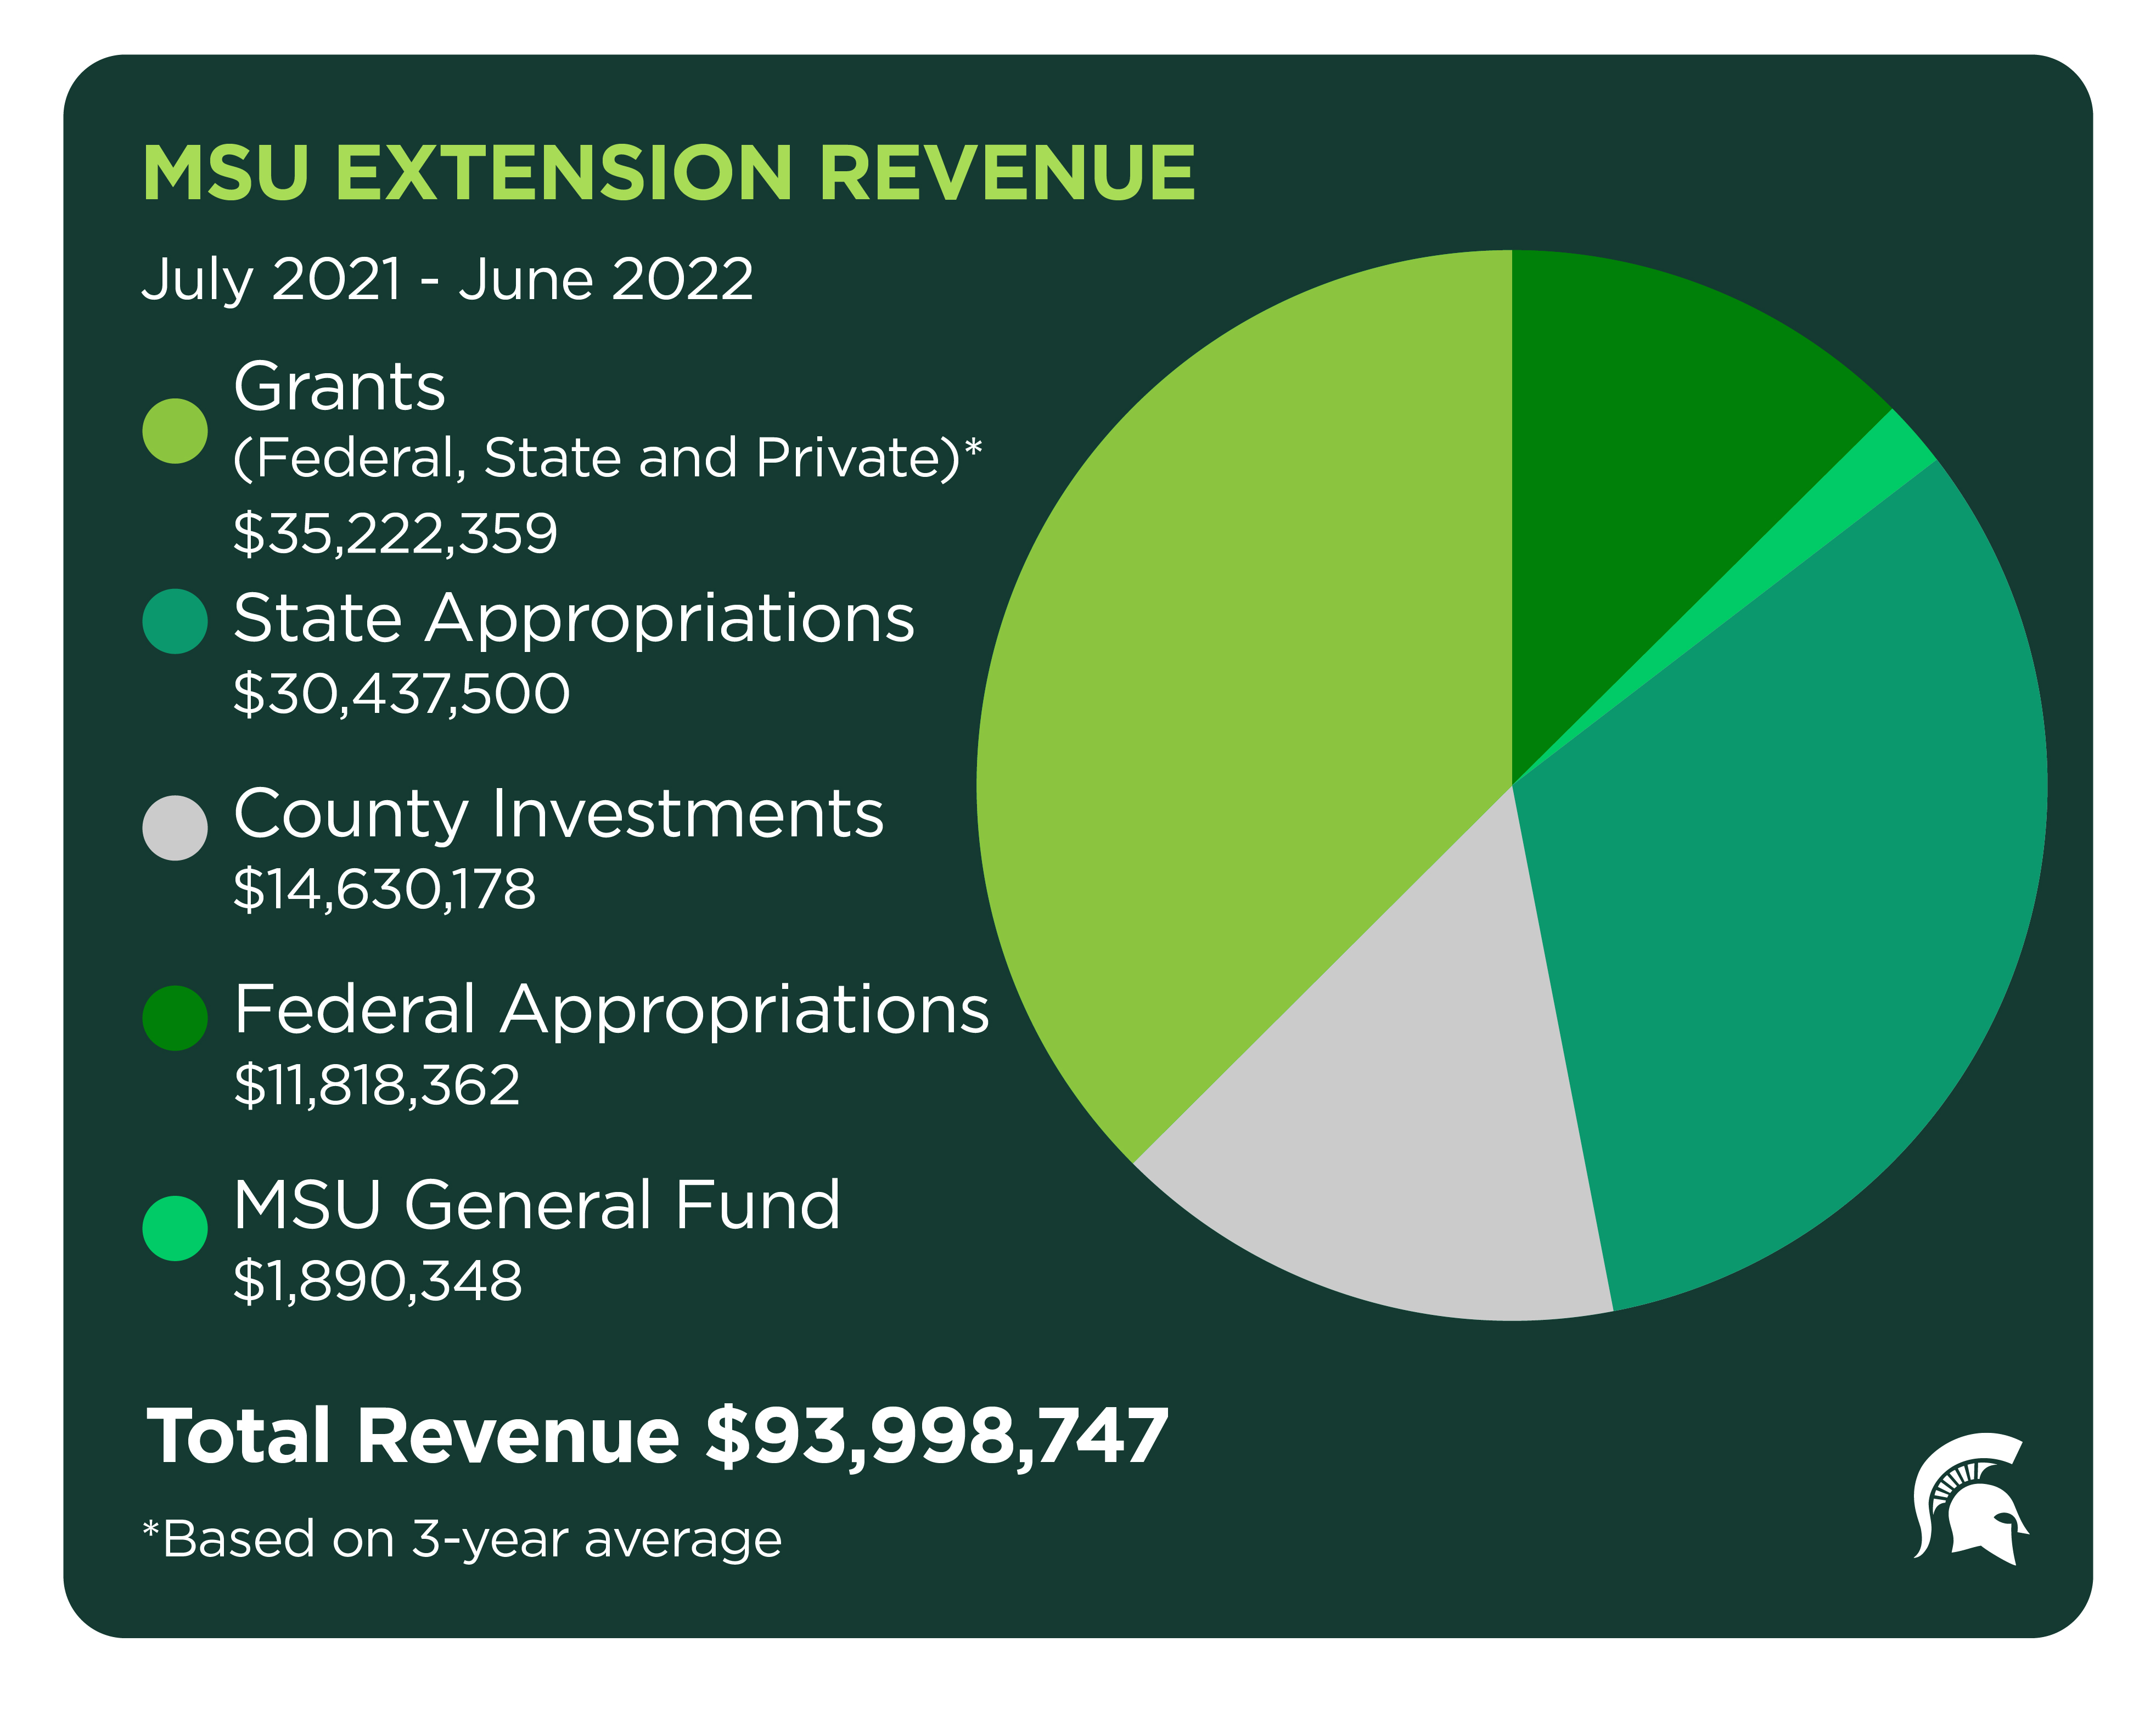 MSU Extension revenue totaled nearly $94M.